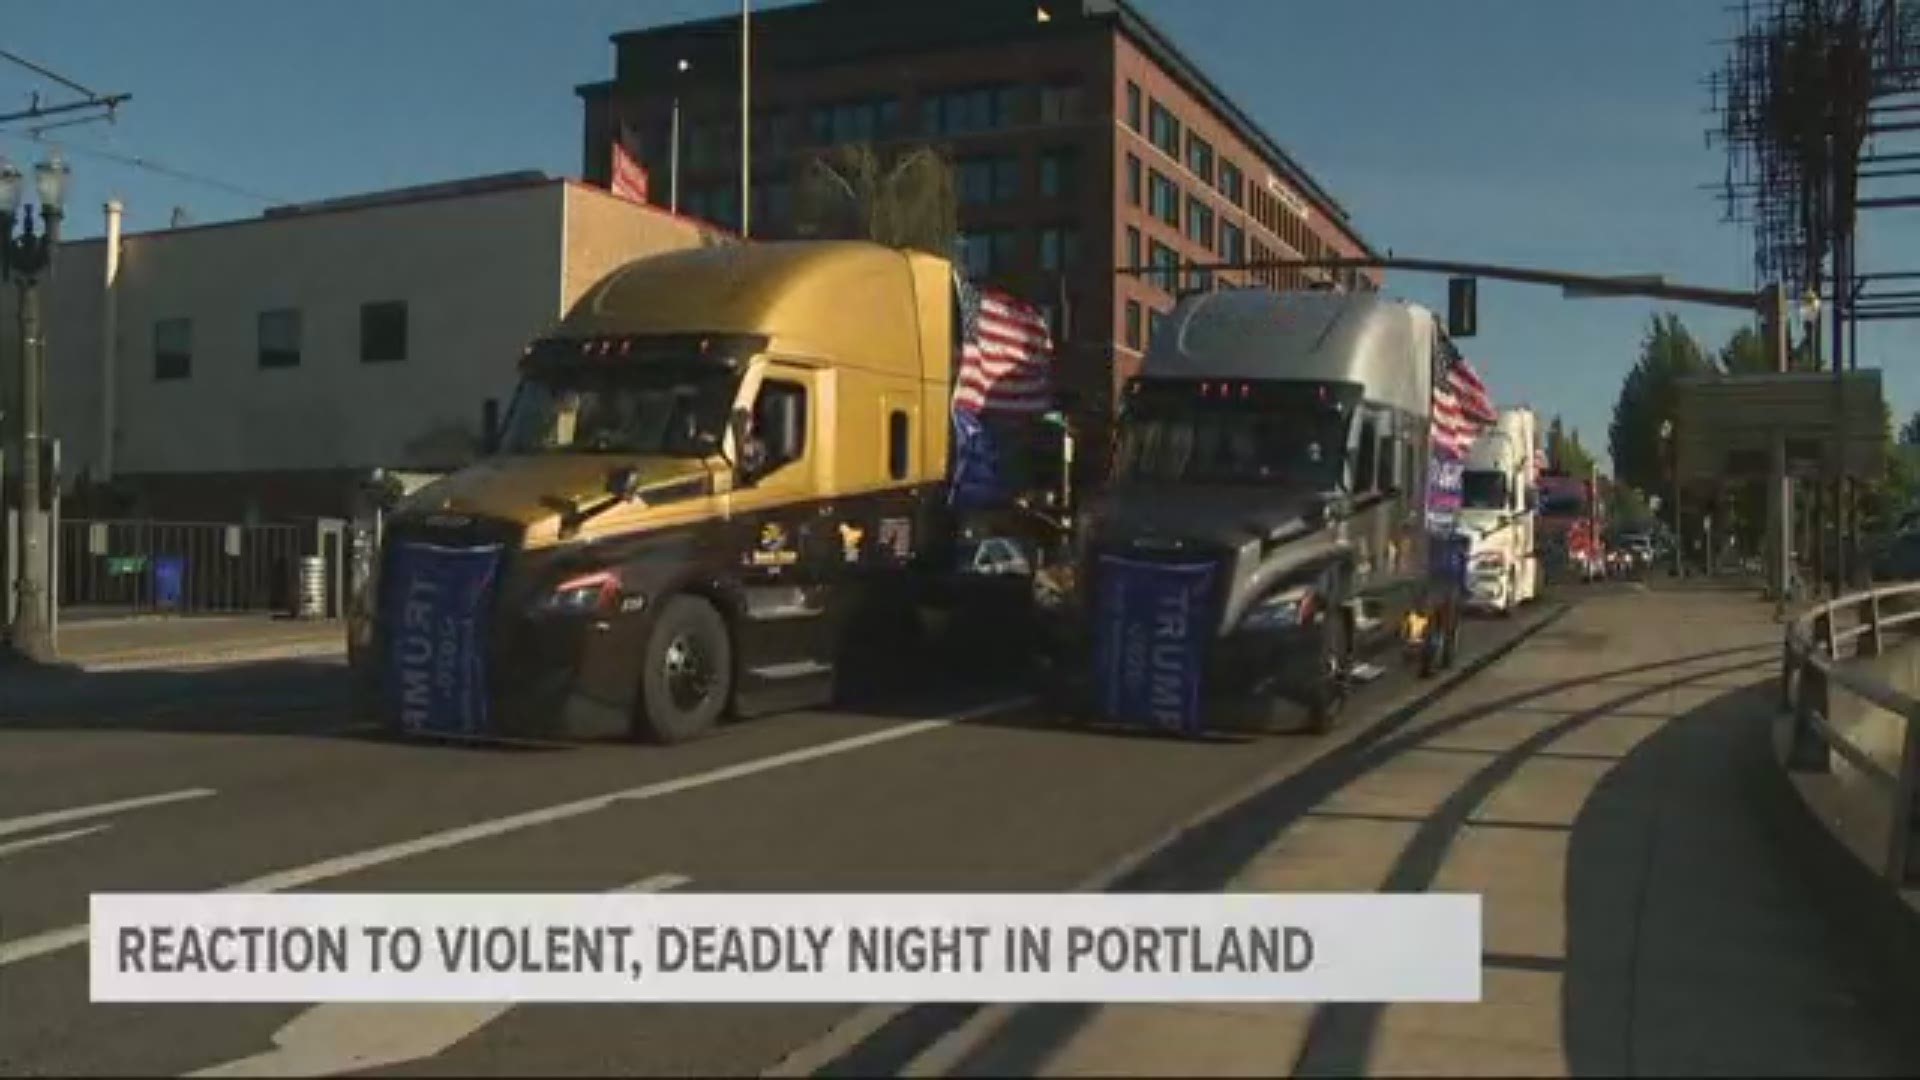 Oregon leaders as well as President Trump and former Vice President Joe Biden all weighed in on violent night in Portland.